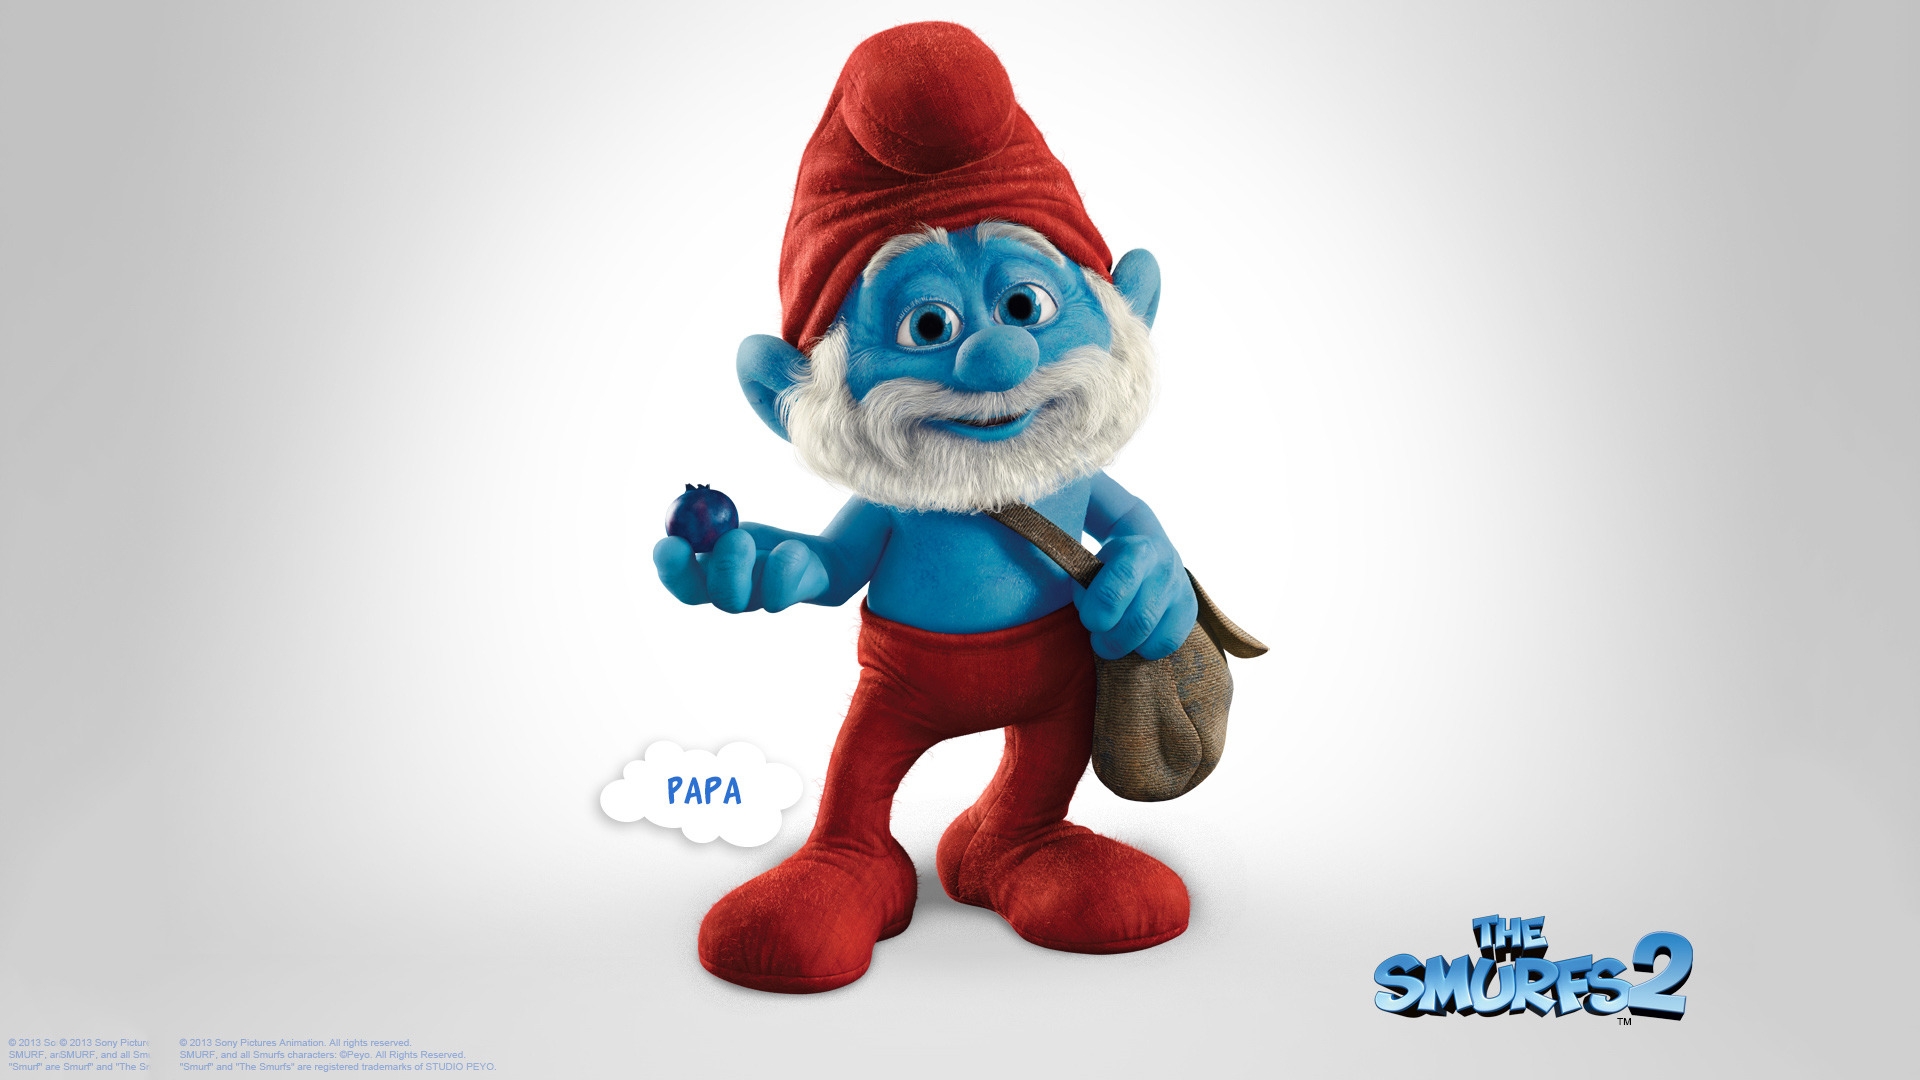 Papa The Smurfs 2 for 1920 x 1080 HDTV 1080p resolution